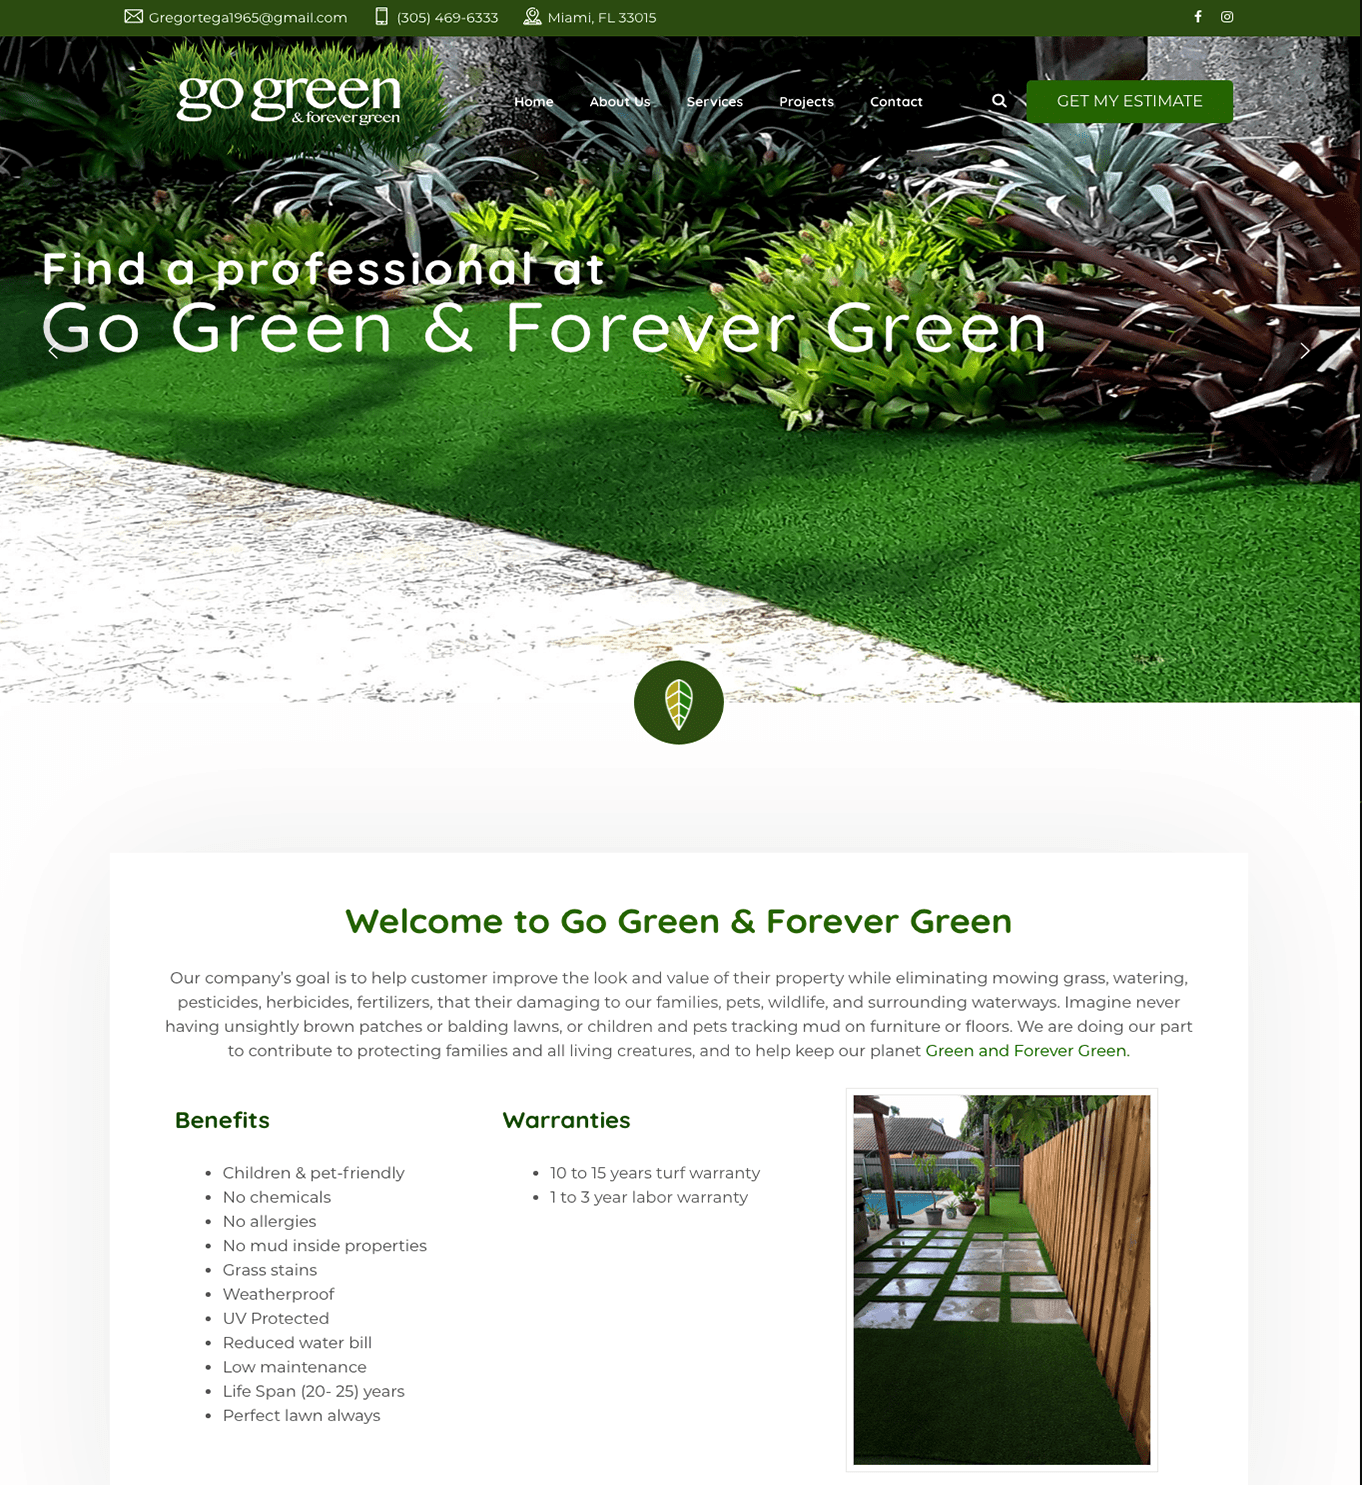 Go Green and Forever Green